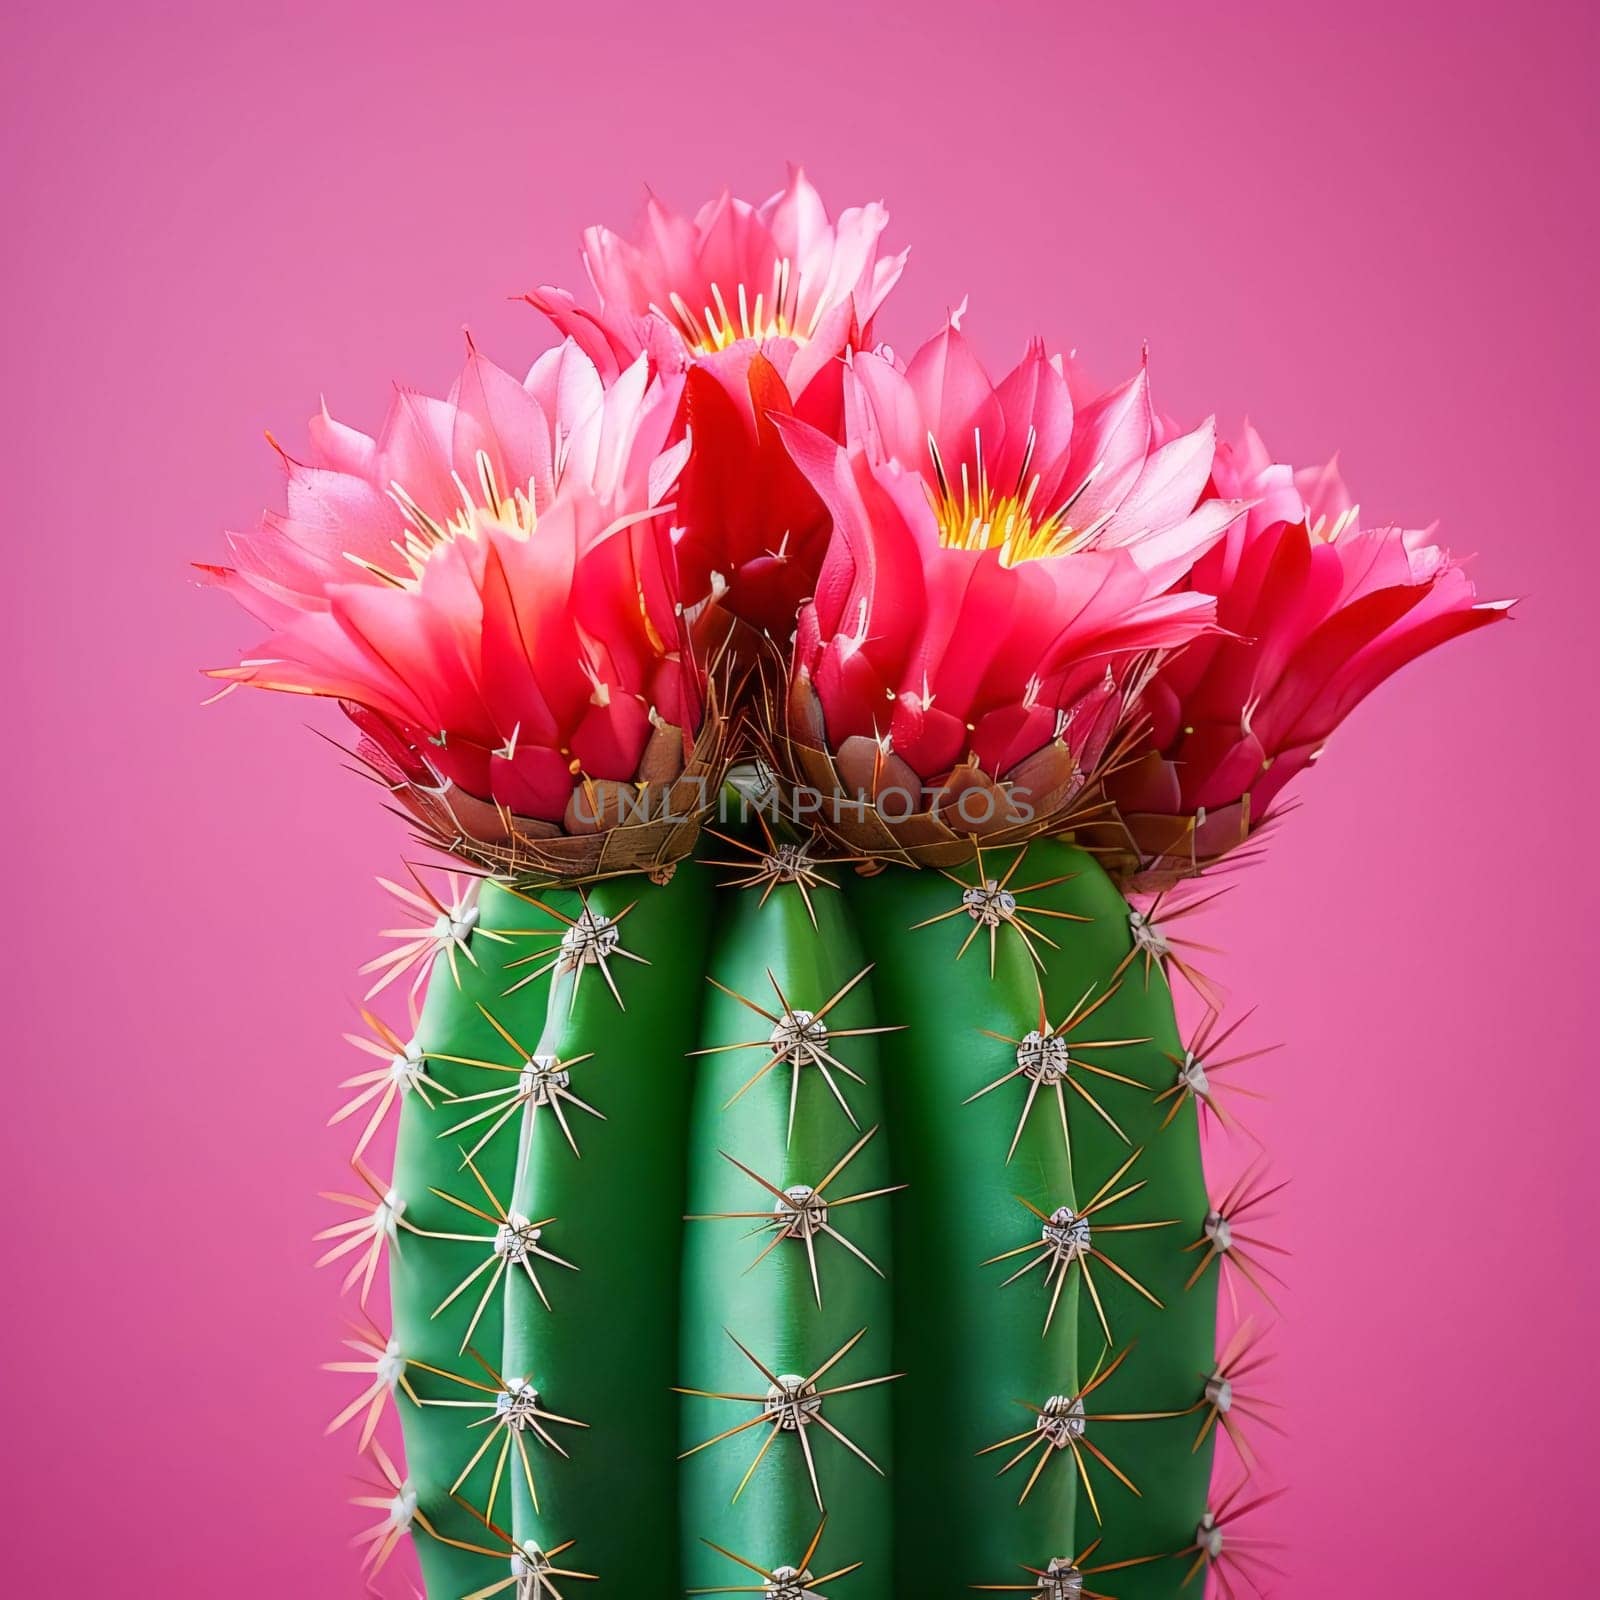 Plant called Cactus: Beautiful cactus with pink flowers on pink background, close up